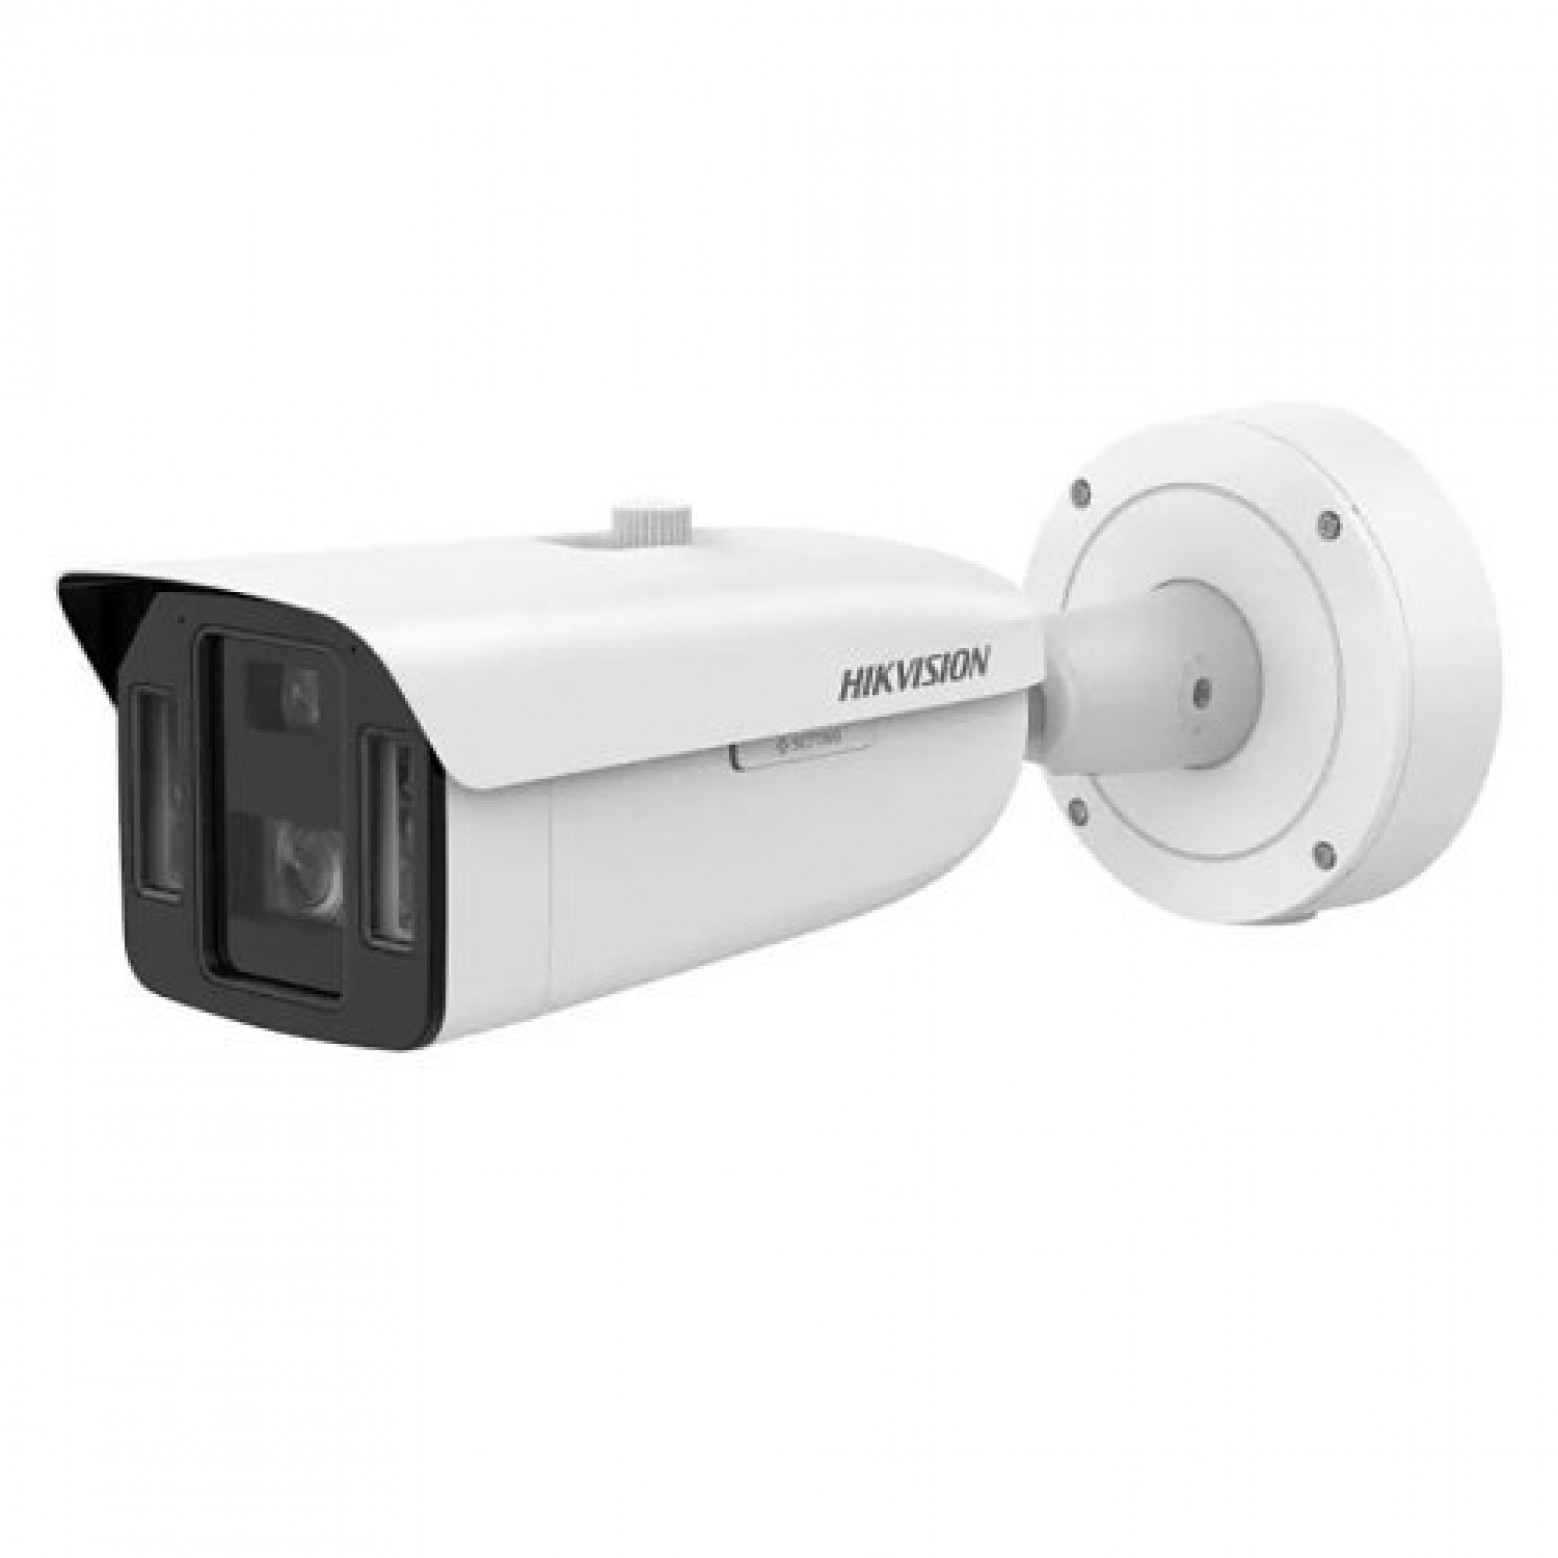 Hikvision IDS-2CD8A46G0-XZHSY 0832/4 - 4MP - DeepinView - Multisensore - Telecamera bullet